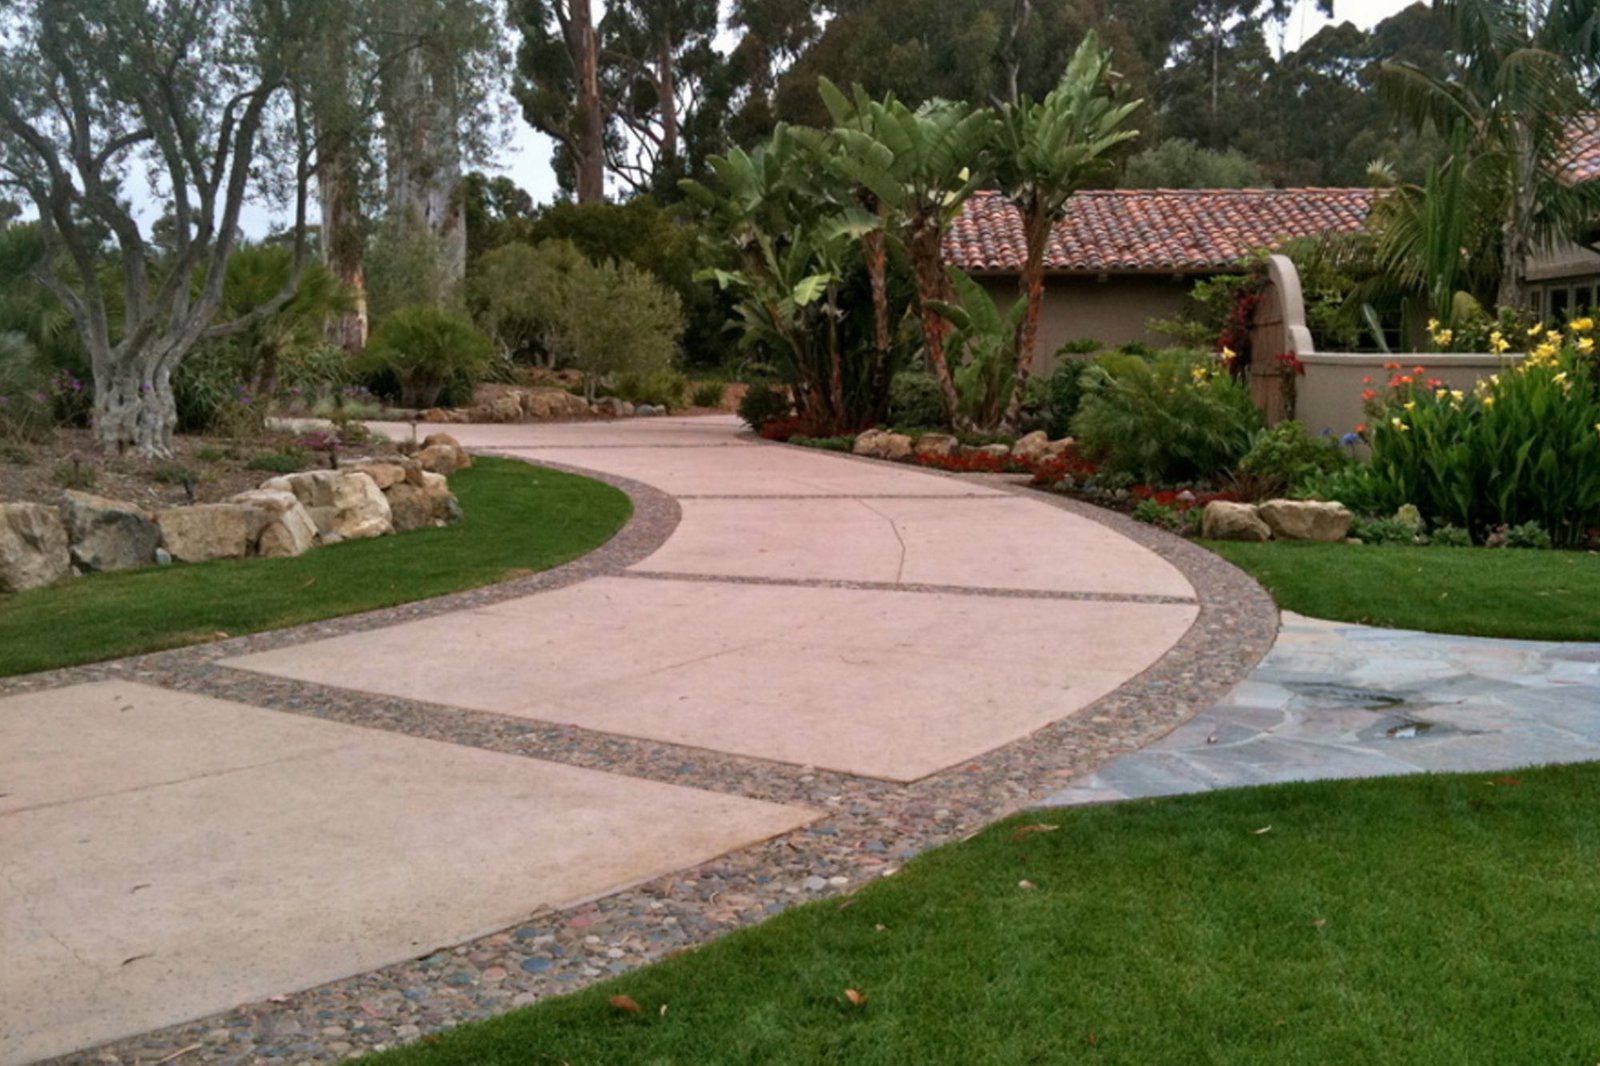 Your Driveway Design can Reduce Water Runoff Damage